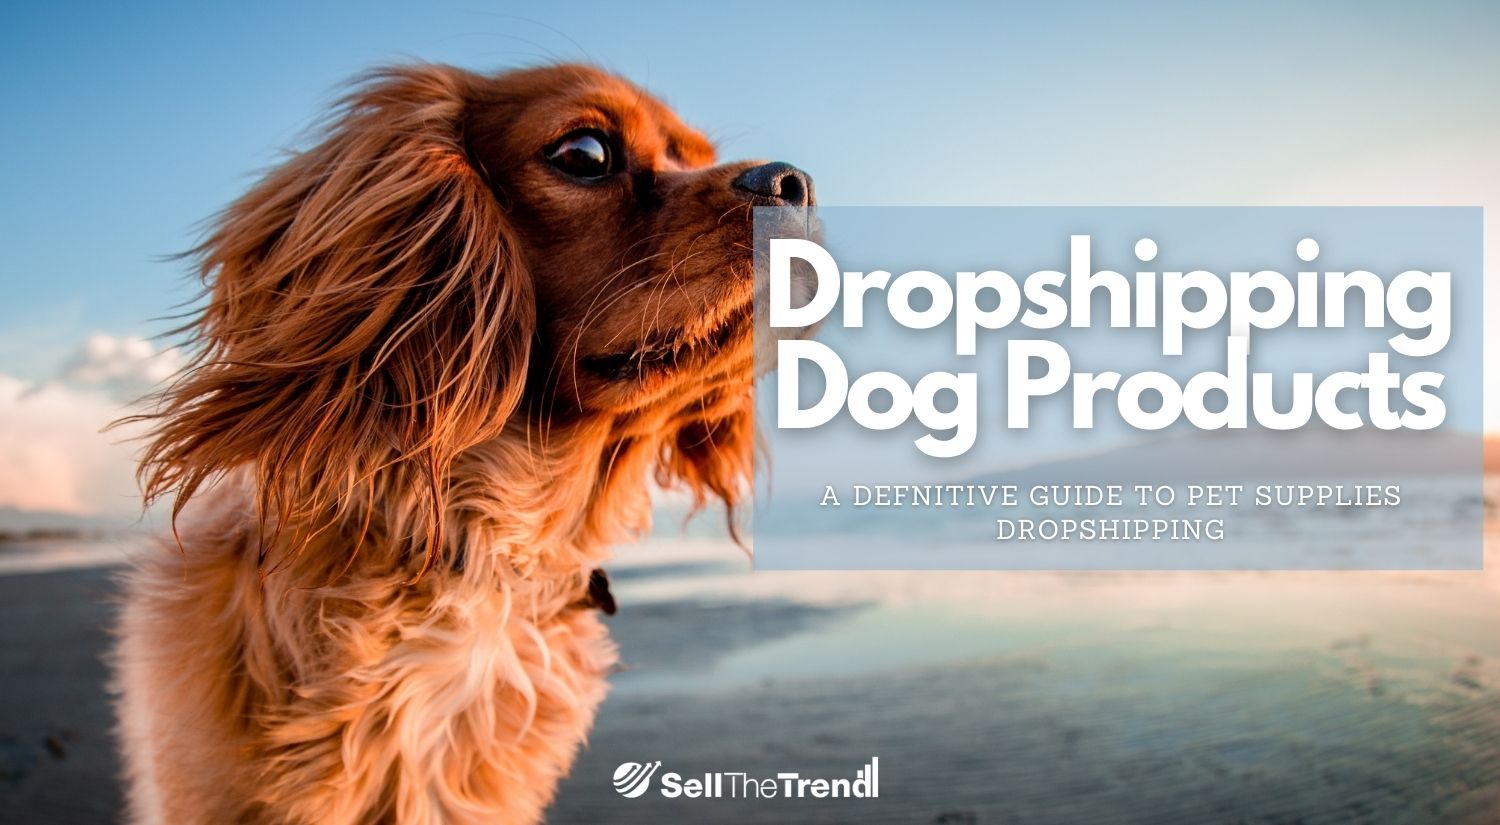 Dropshipping Dog Products: A Definitive Guide 2021